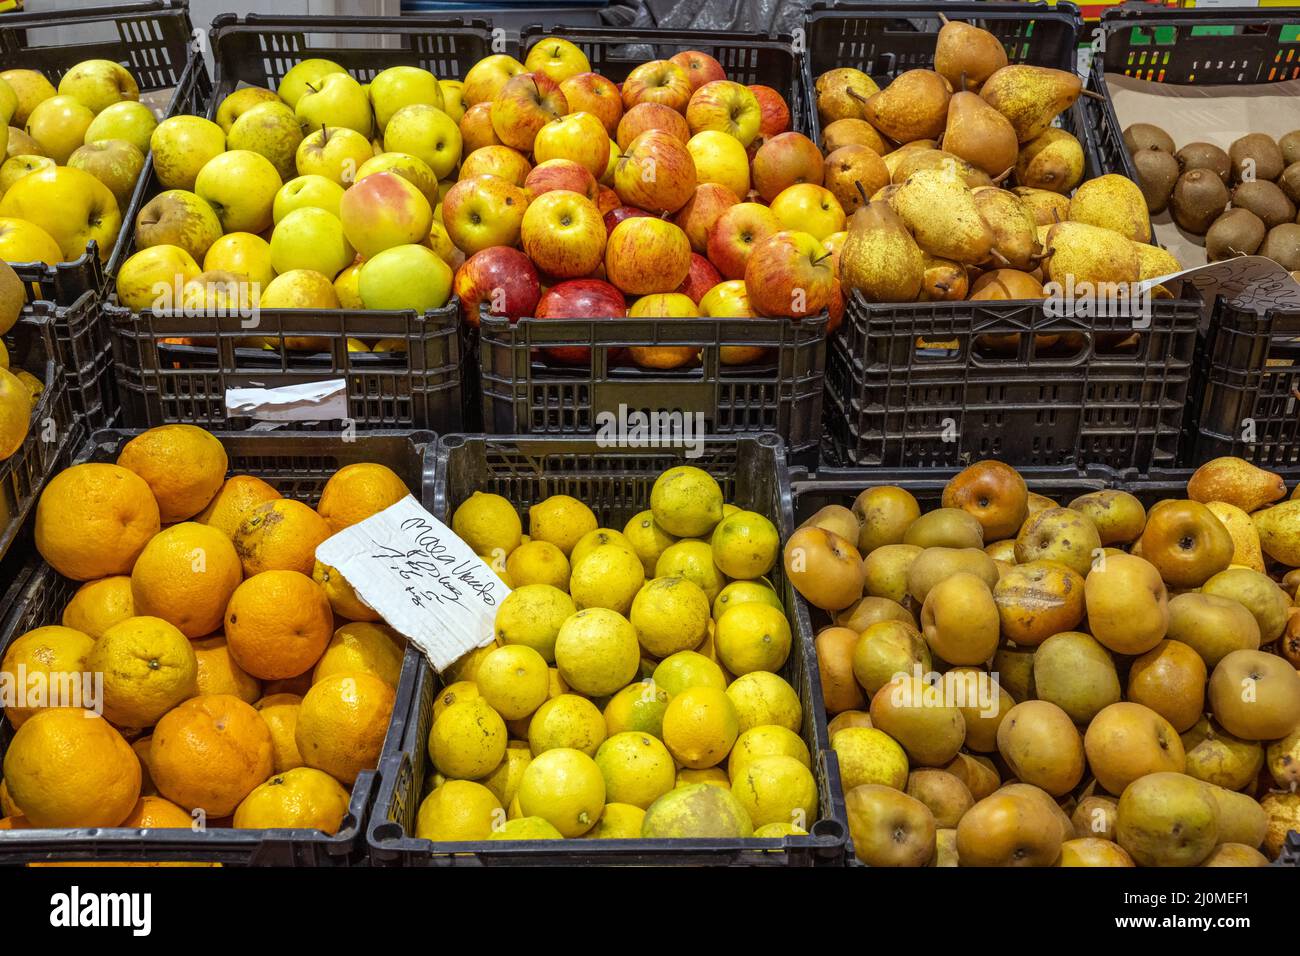 Apples, oranges and pears for sale at a market Stock Photo